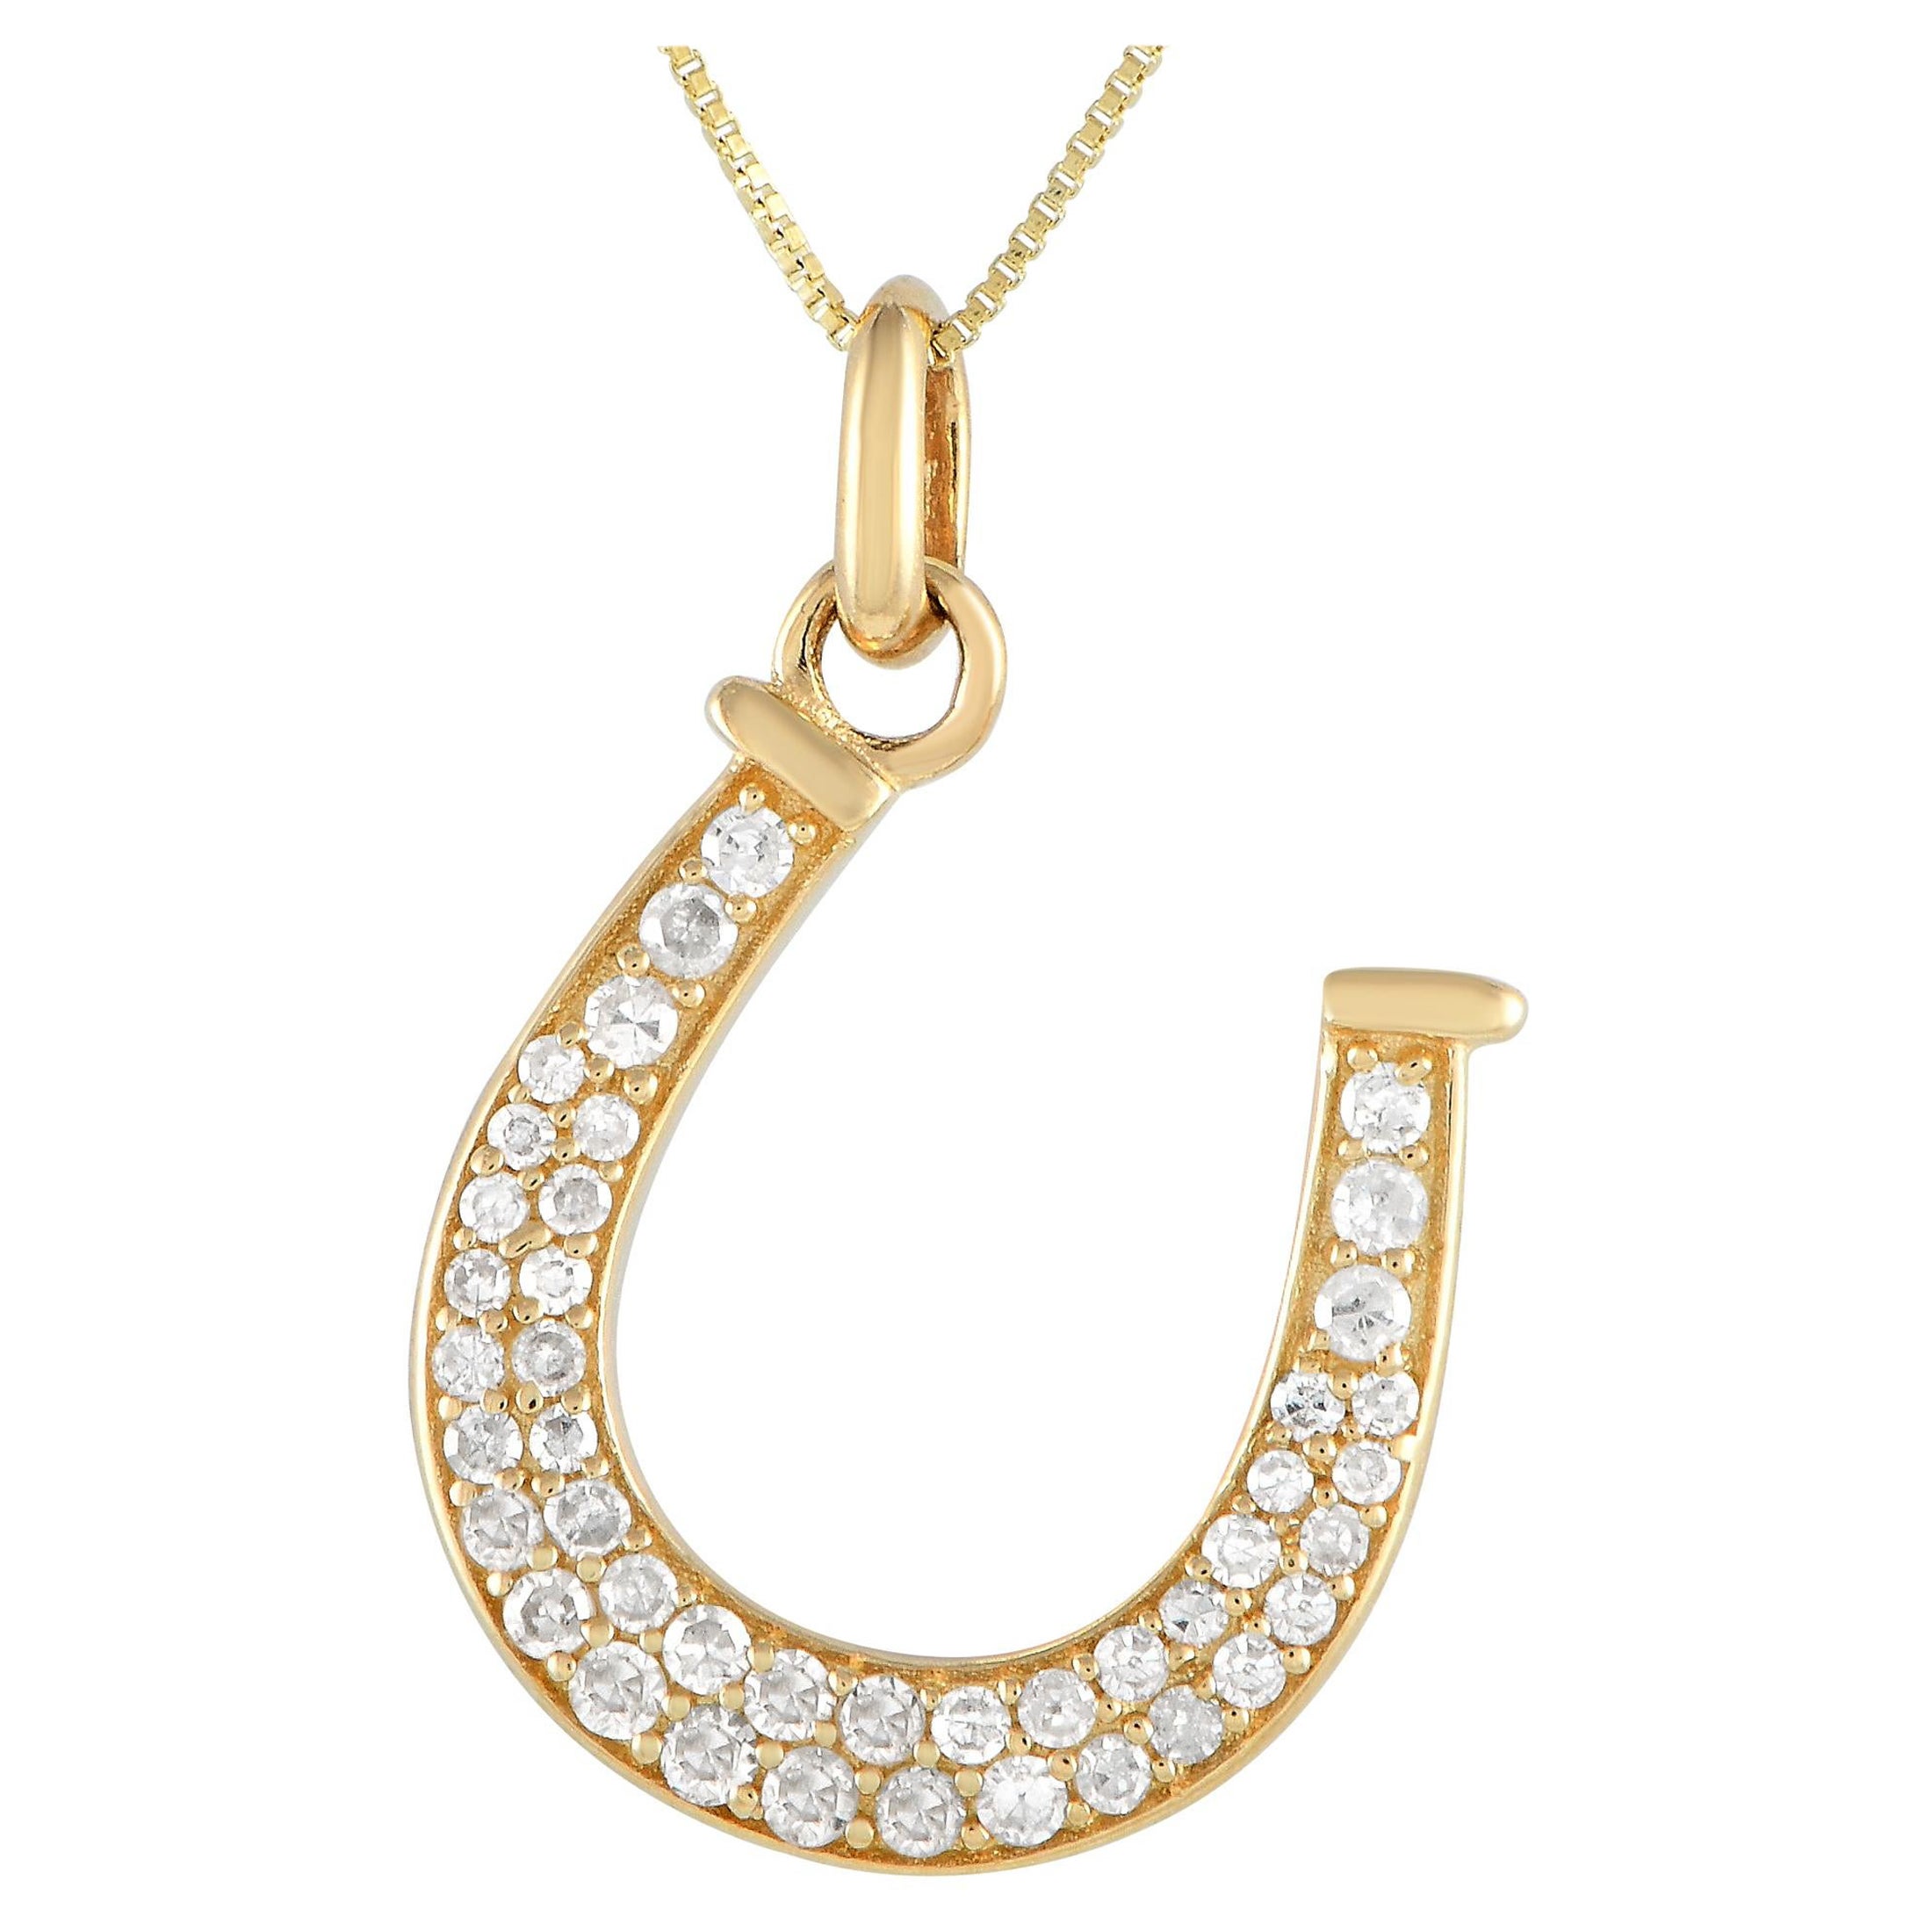 LB Exclusive 14K Yellow Gold 0.18ct Diamond Horseshoe Necklace PD4-15625Y For Sale